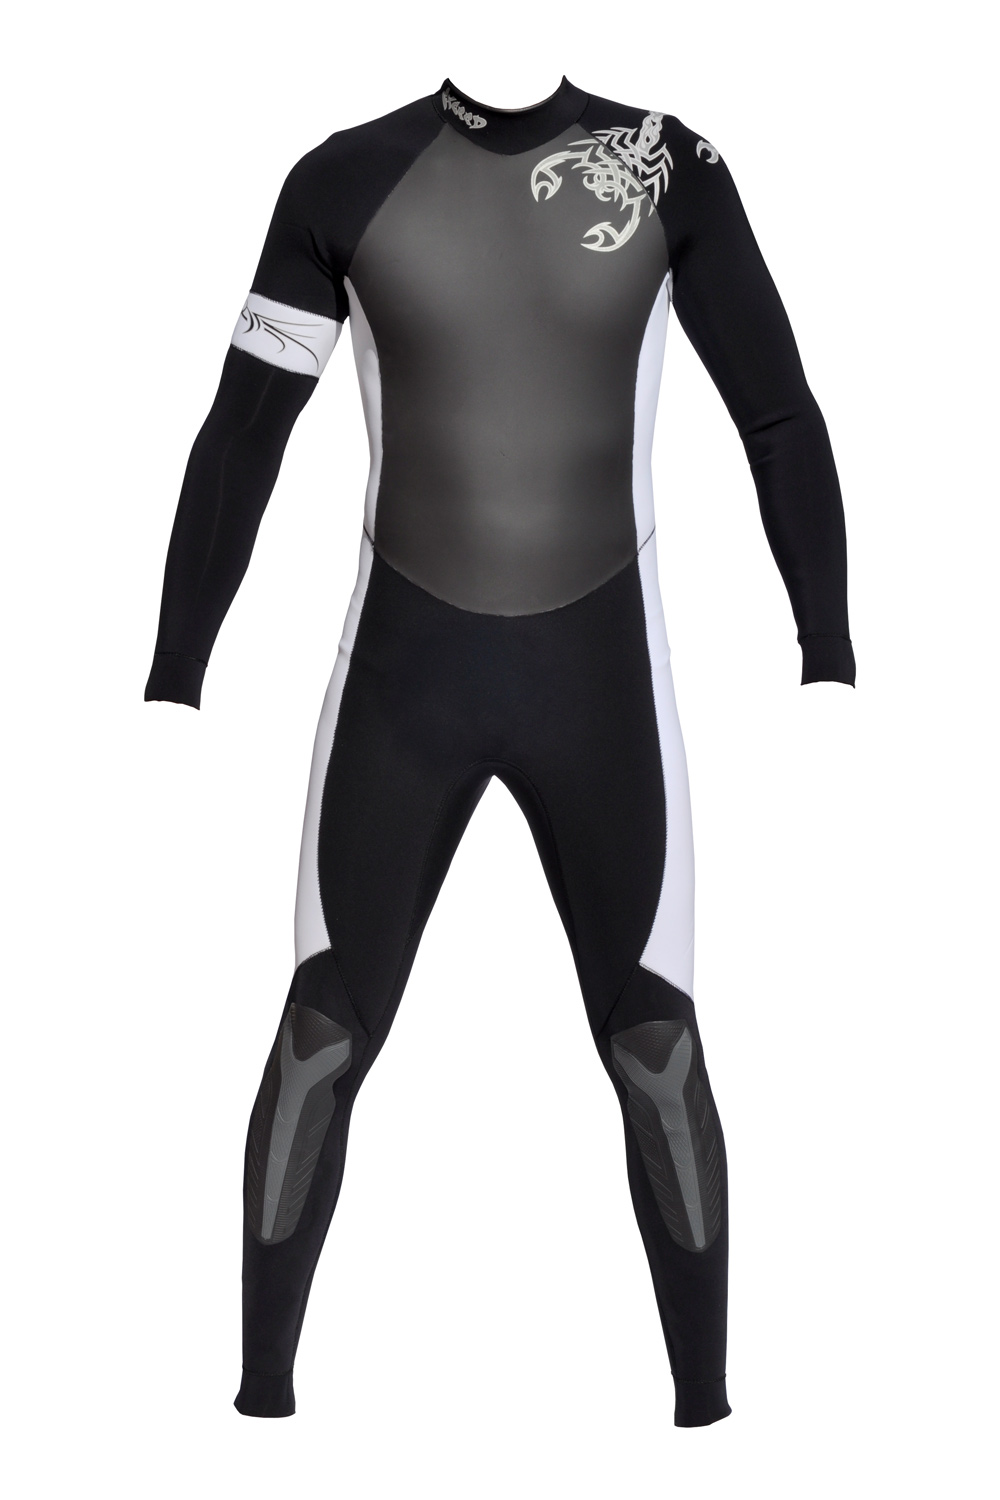 Exceed Execute Mens 3/2mm Full Wetsuit